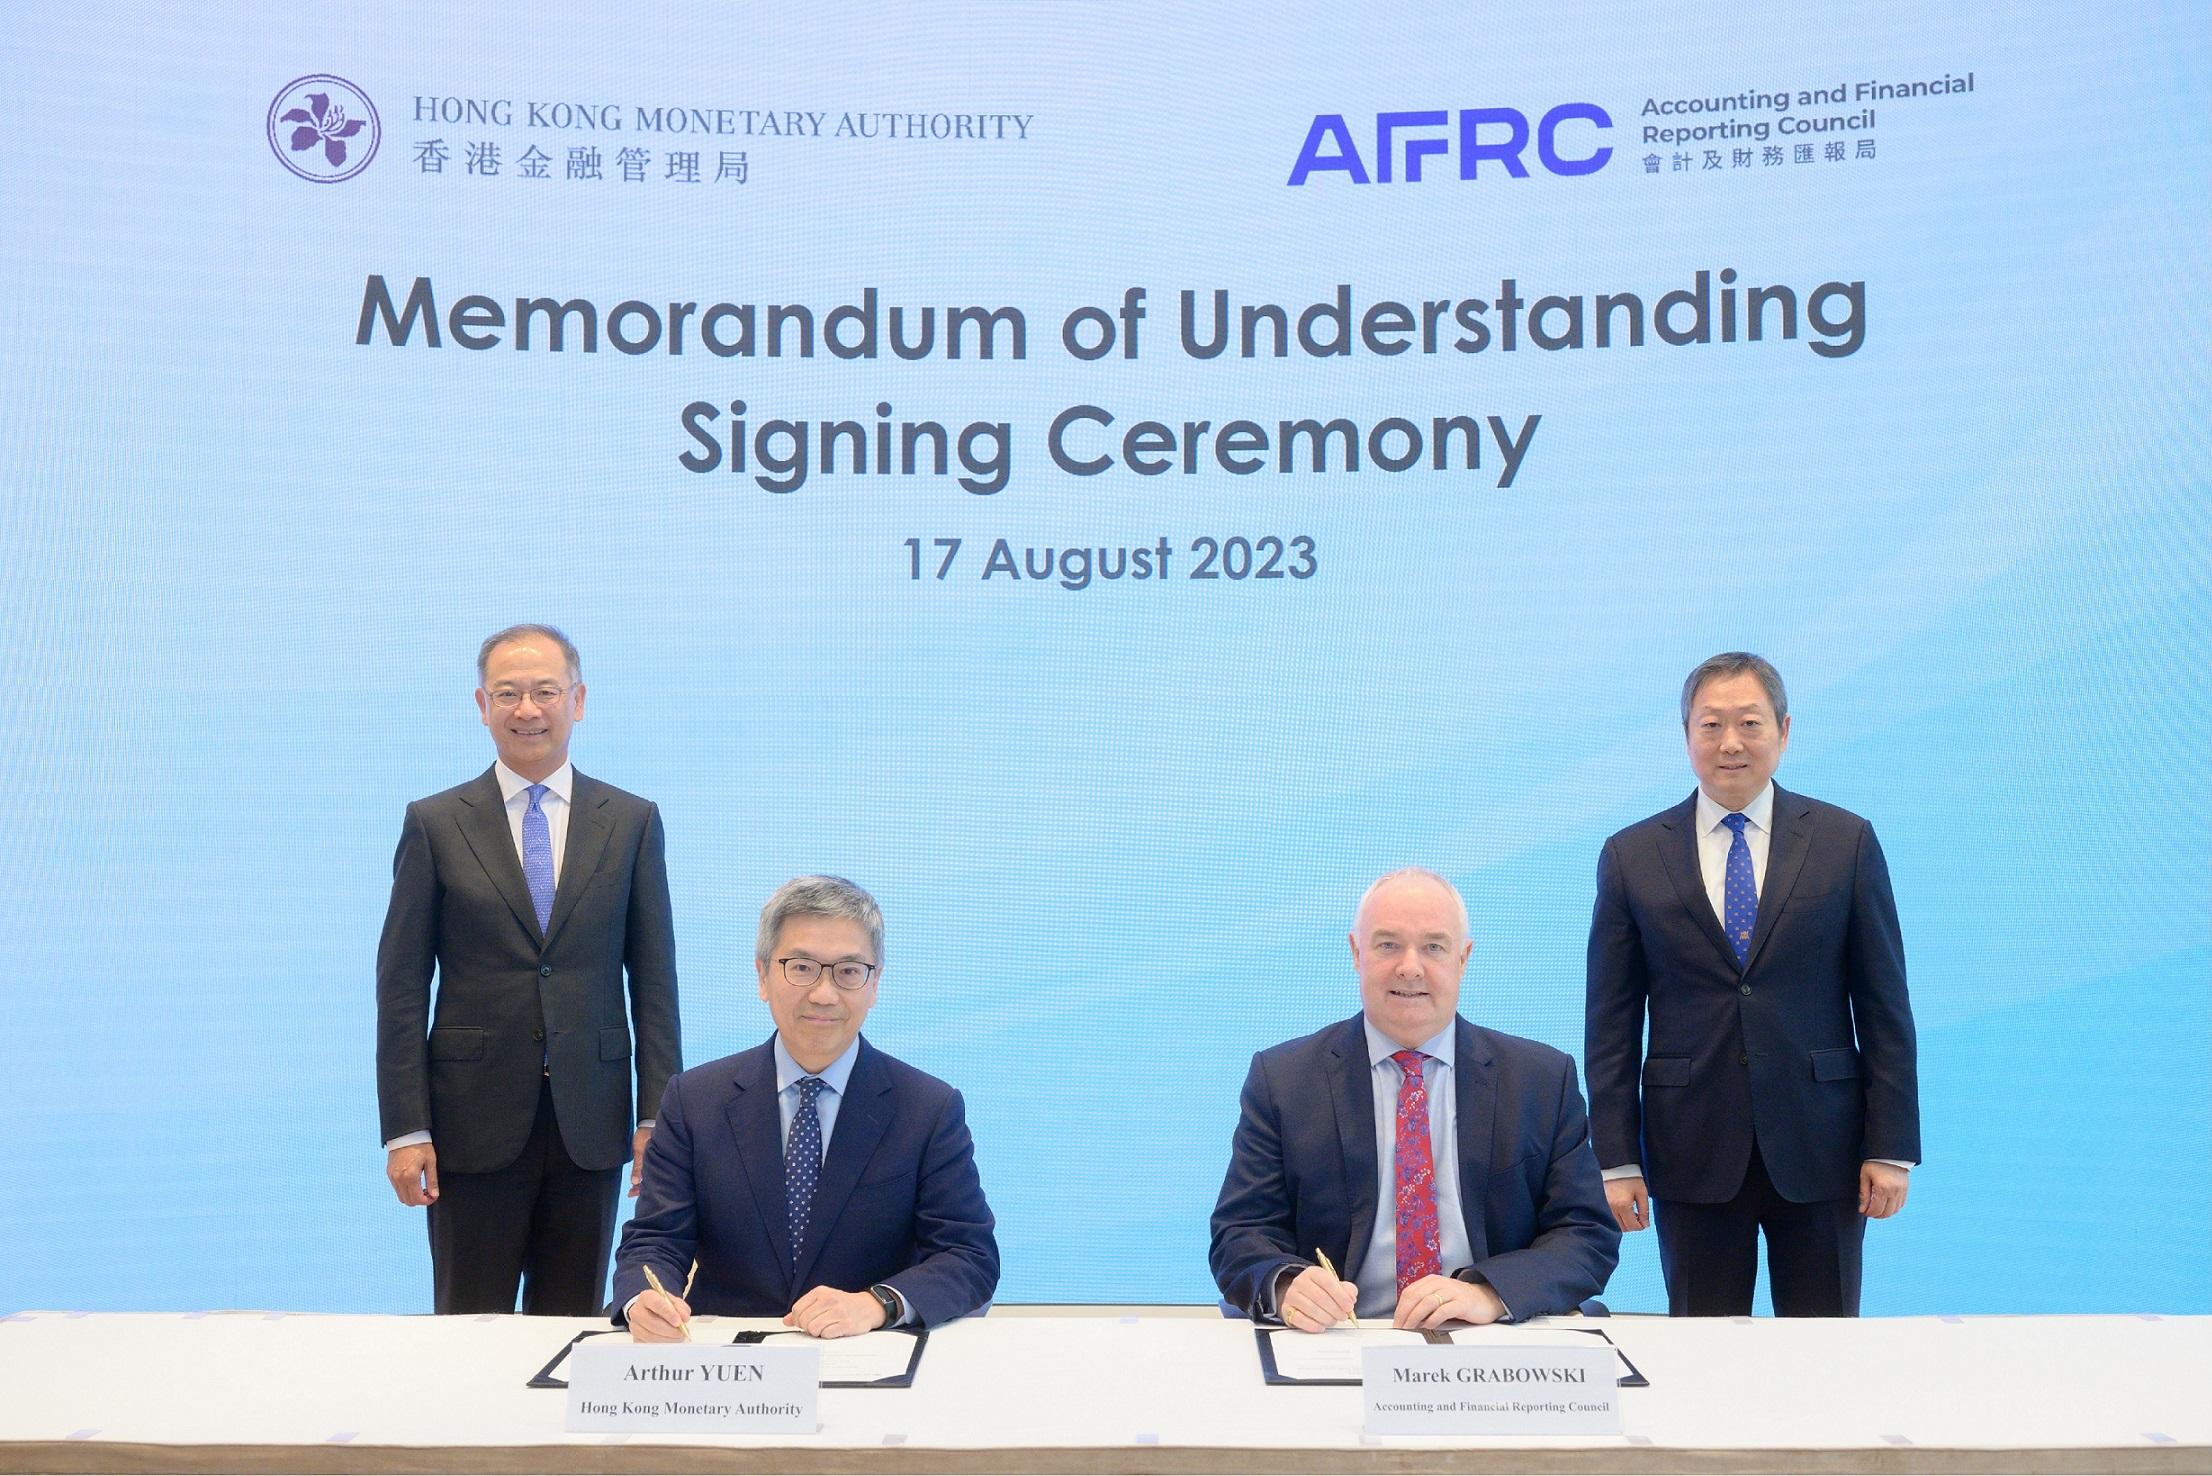 Deputy Chief Executive of the Hong Kong Monetary Authority Mr Arthur Yuen (second left), and the Chief Executive Officer of the Accounting and Financial Reporting Council, Mr Marek Grabowski (second right), sign a new Memorandum of Understanding today (August 17) in the presence of the Chief Executive of the Hong Kong Monetary Authority, Mr Eddie Yue (left), and the Chairman of the Accounting and Financial Reporting Council, Dr Kelvin Wong (right).
